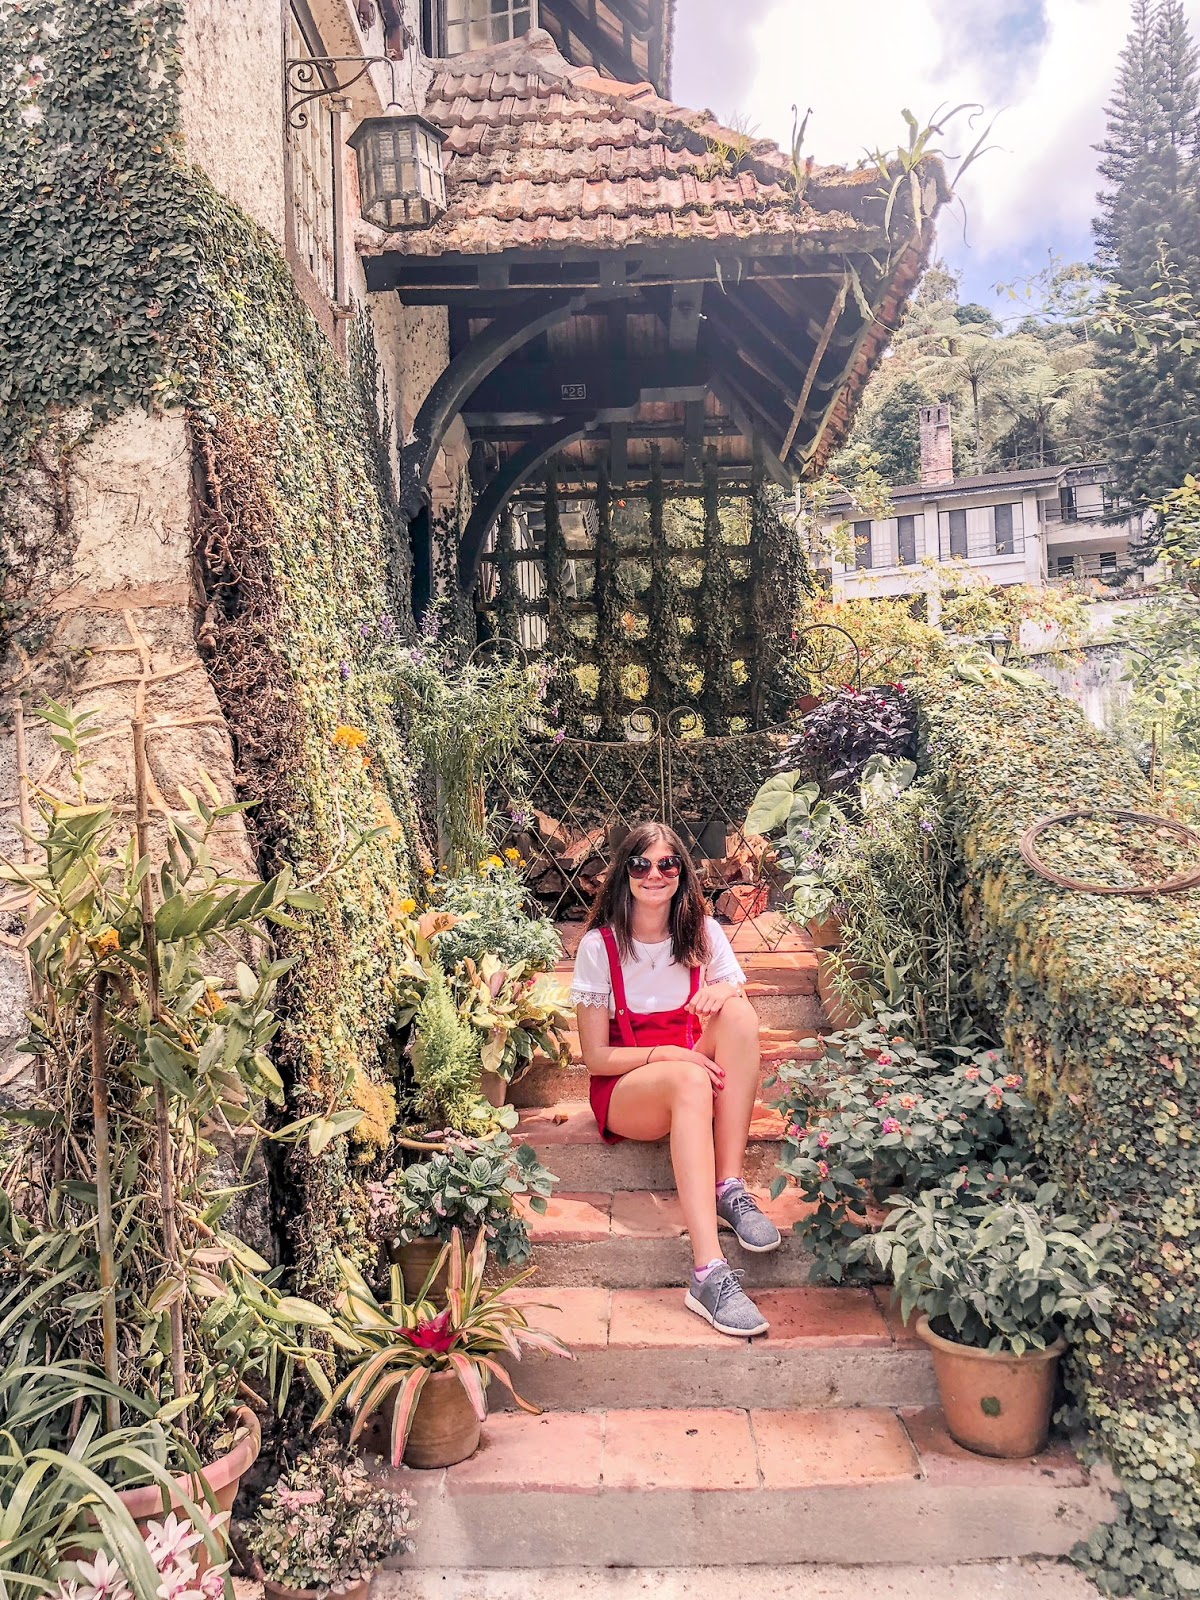 Melis Living: A long weekend in Cameron Highlands, Malaysia